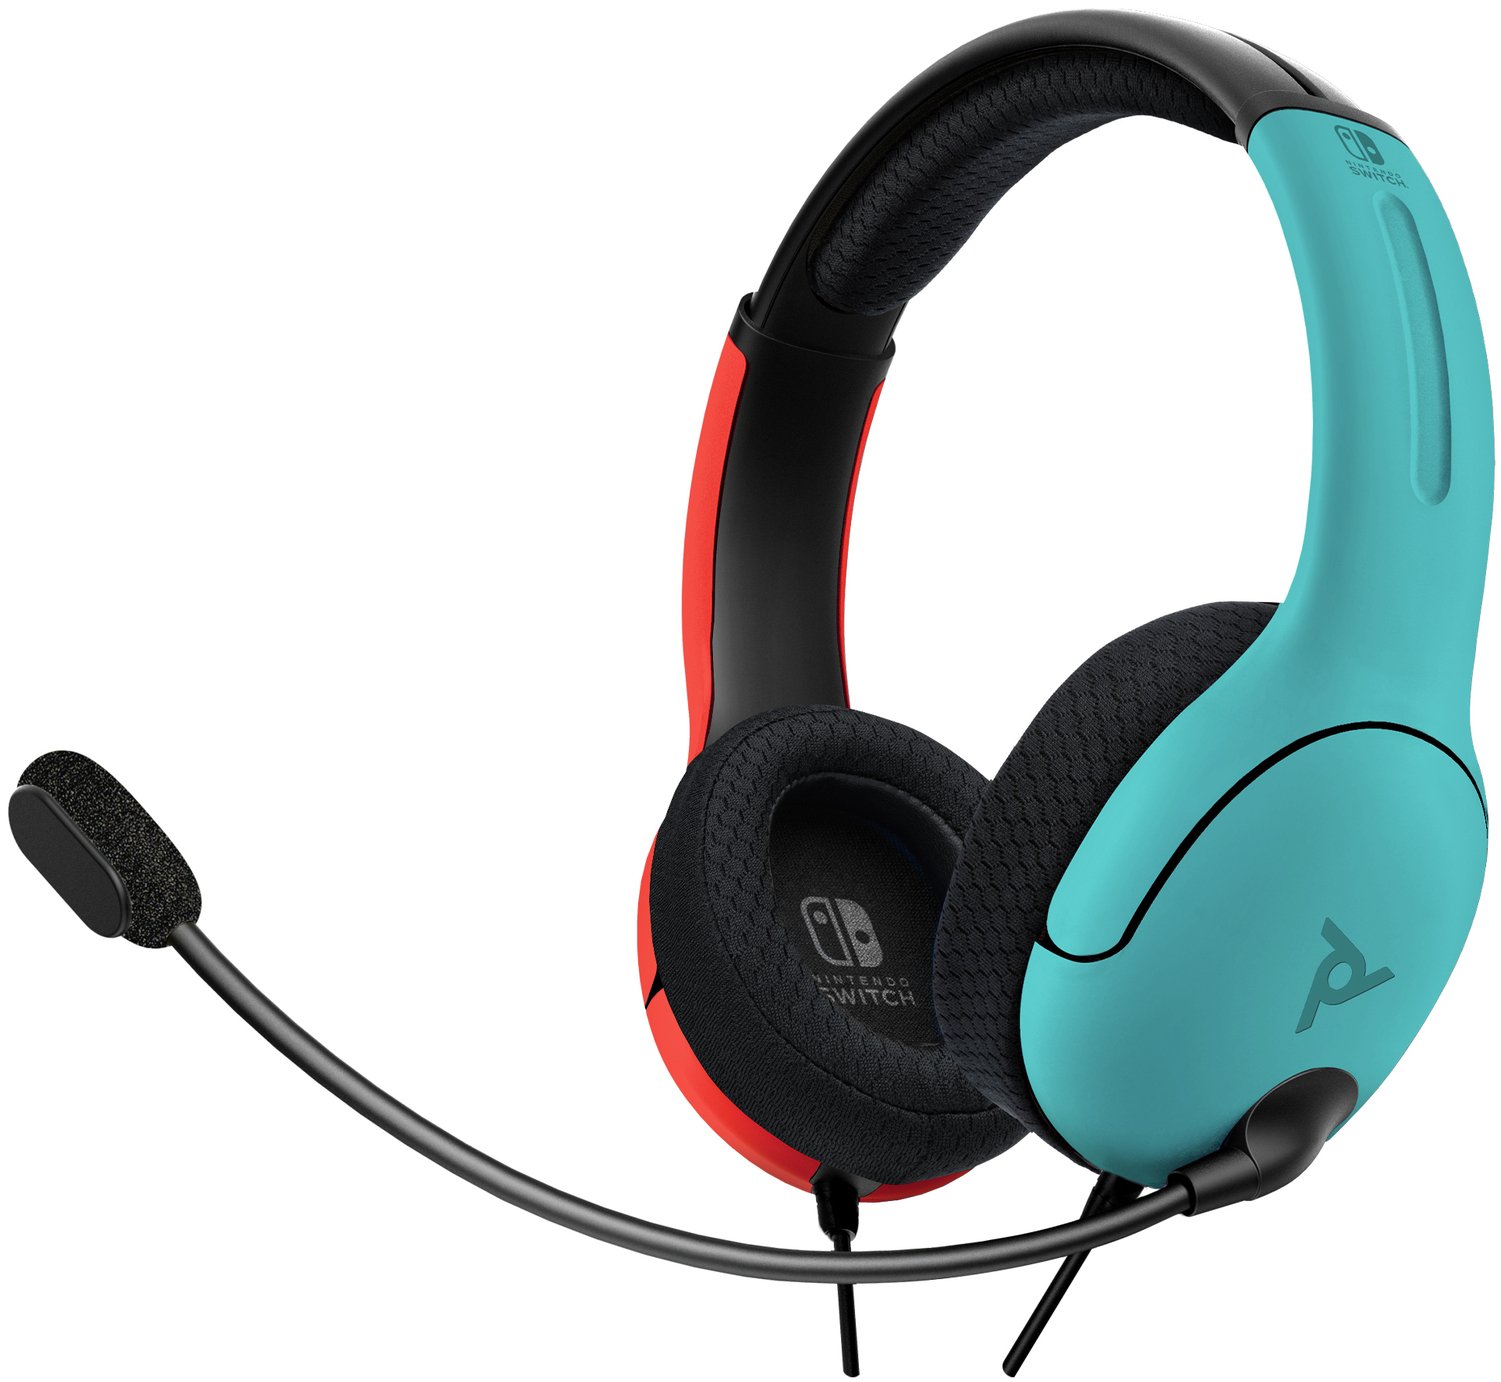 nintendo switch compatible headsets